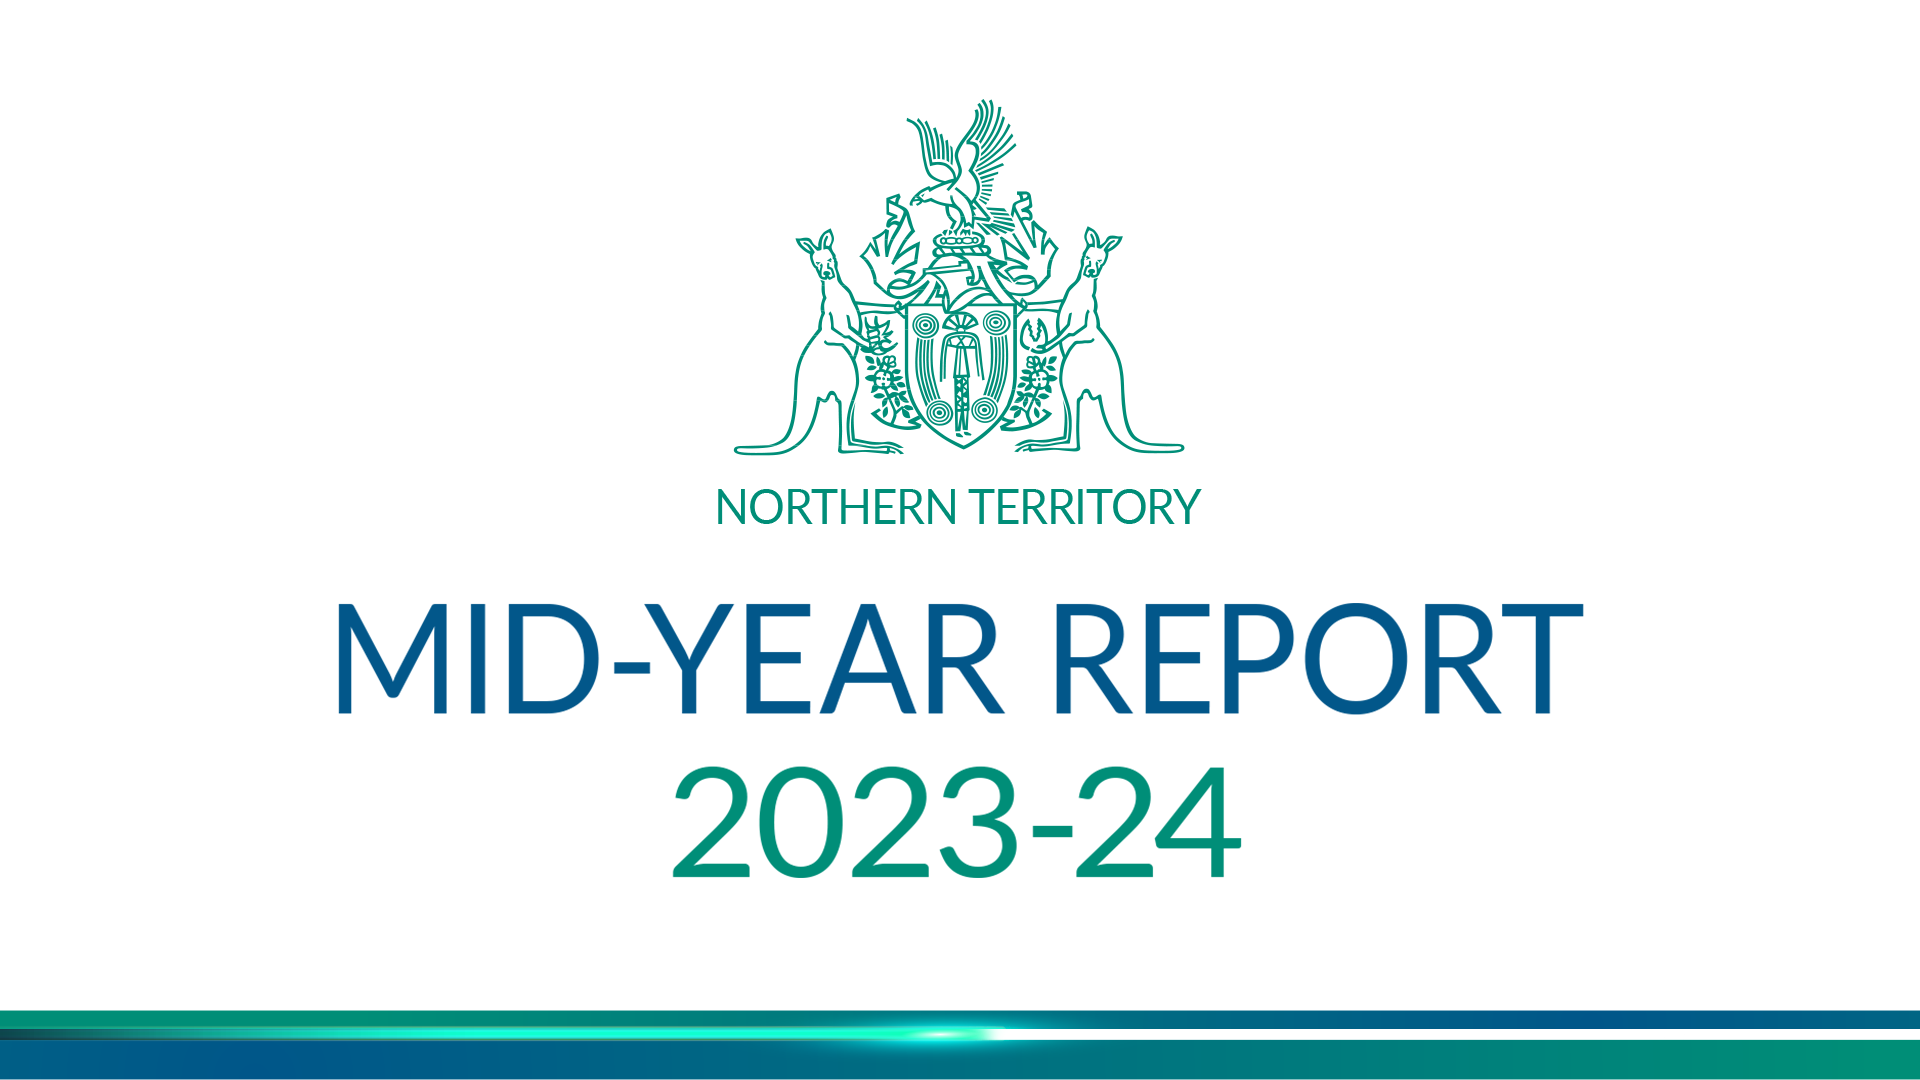 2023-24 Mid-Year Report image